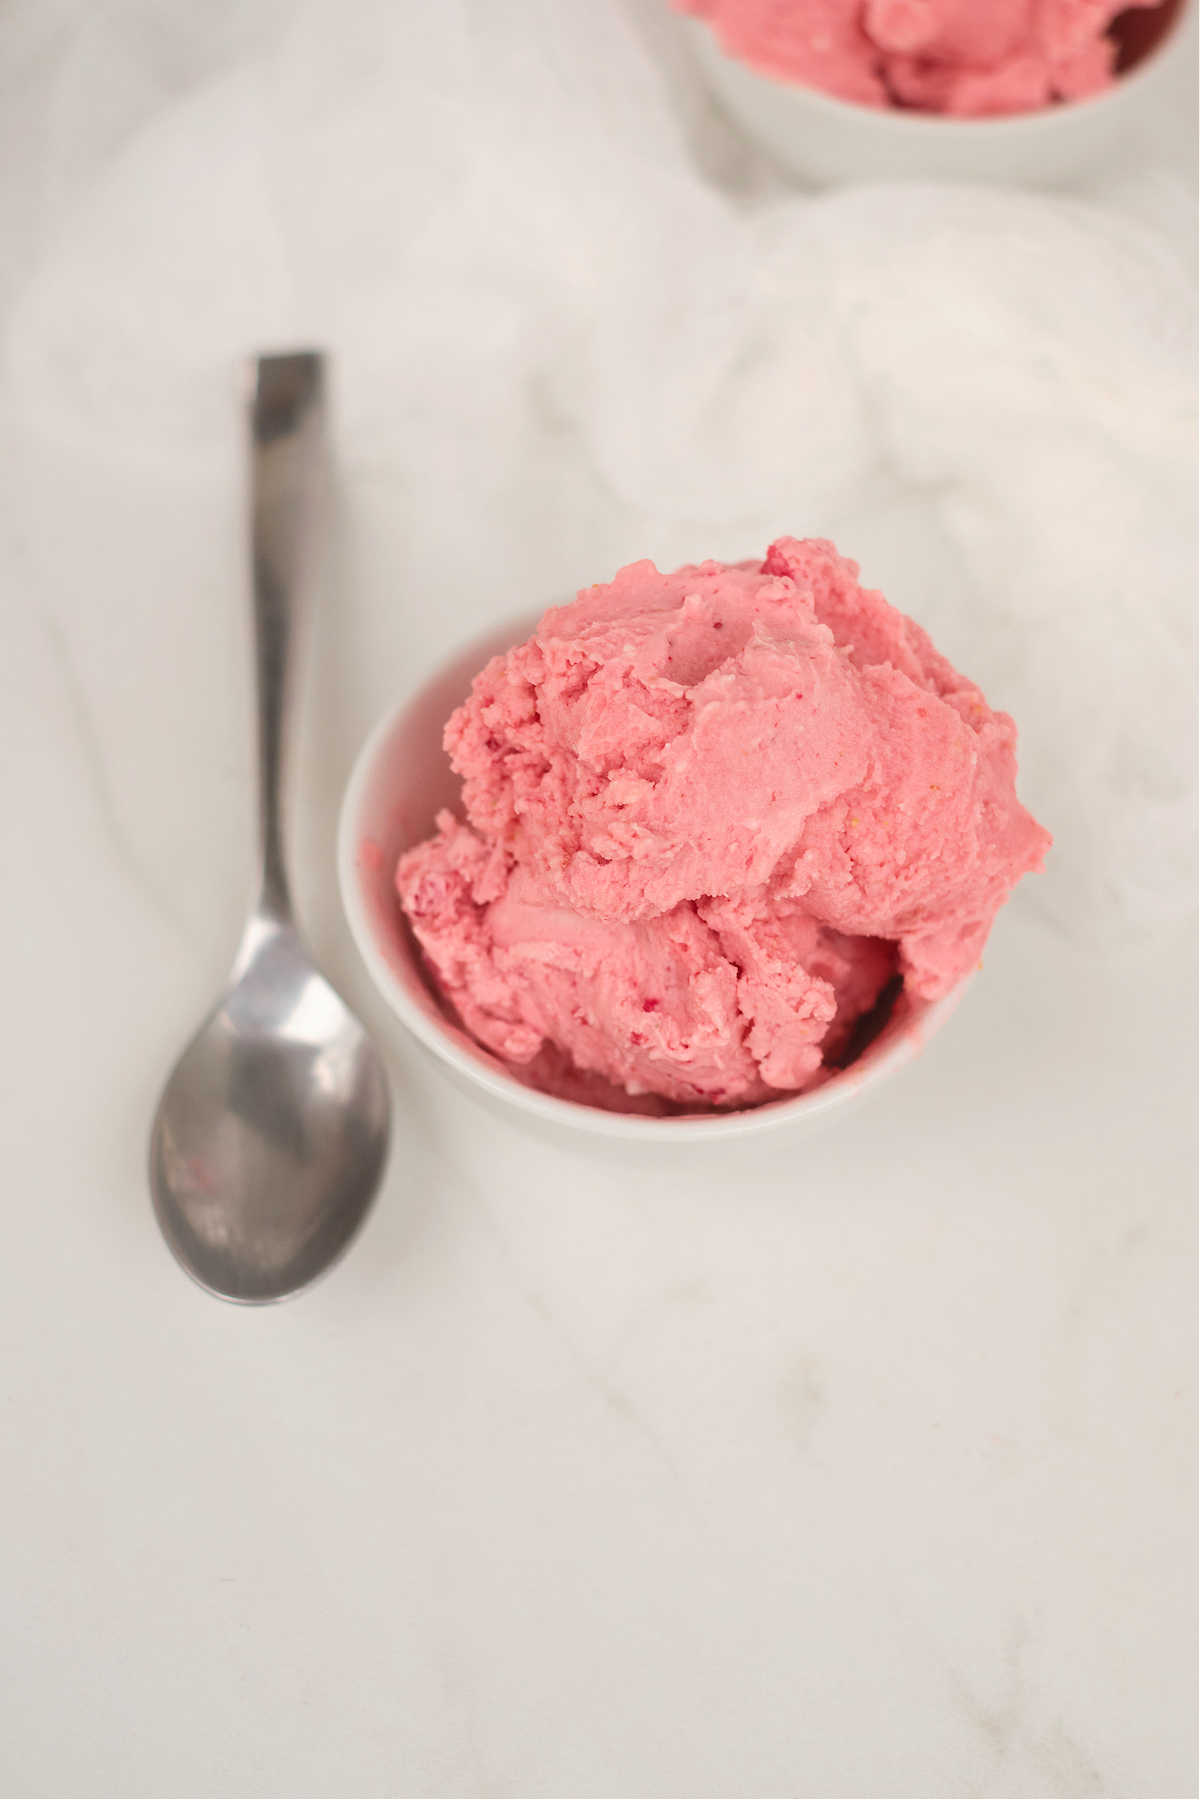 one serving of strawberry flavored ice cream in a bowl next to a spoon